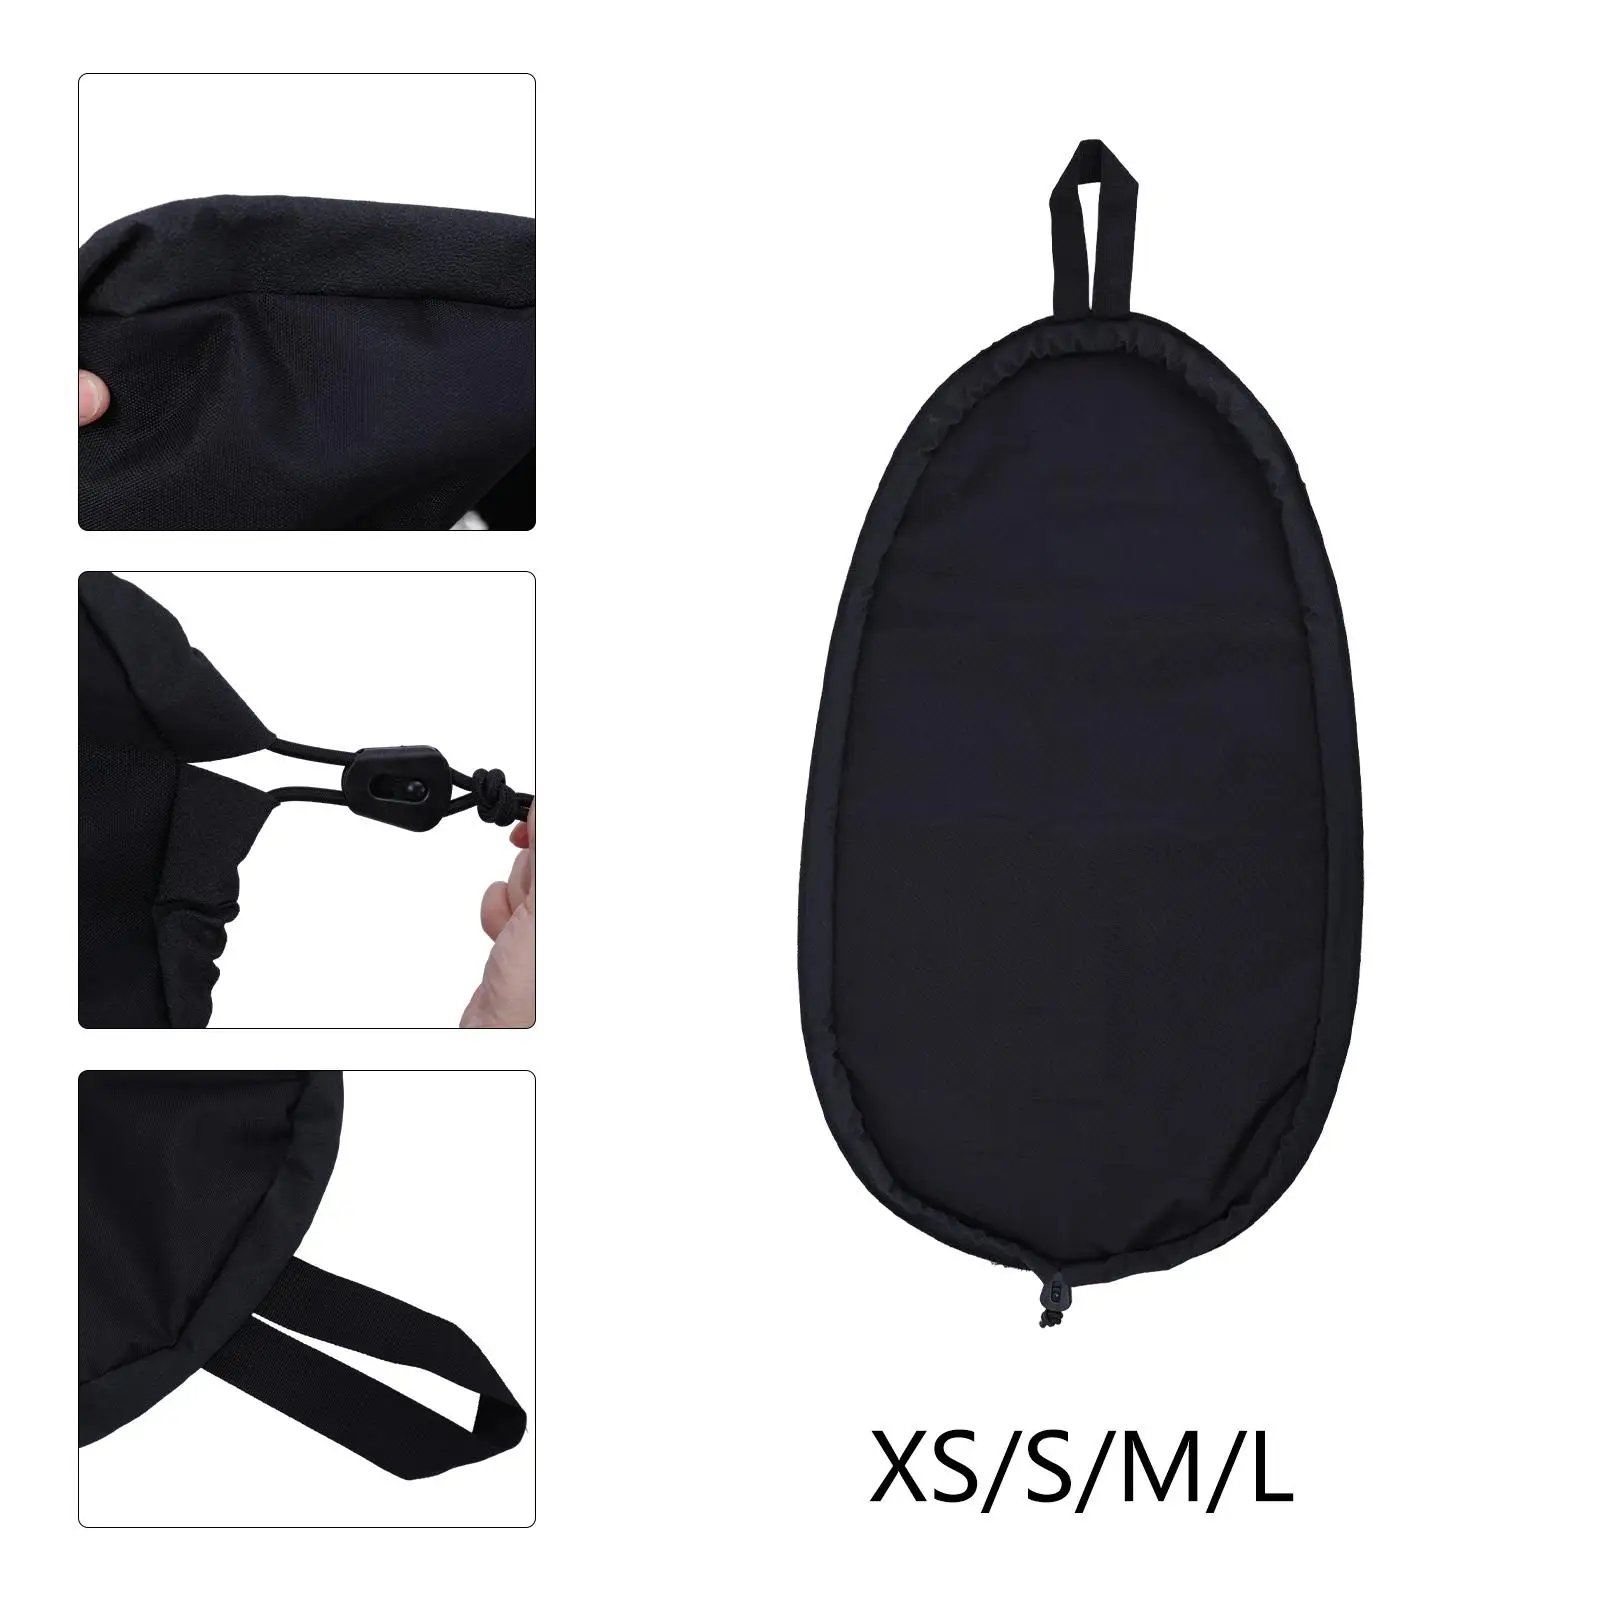 Kayak Cockpit Cover Adjustable Sun Protection Waterproof Shield Seat Cover